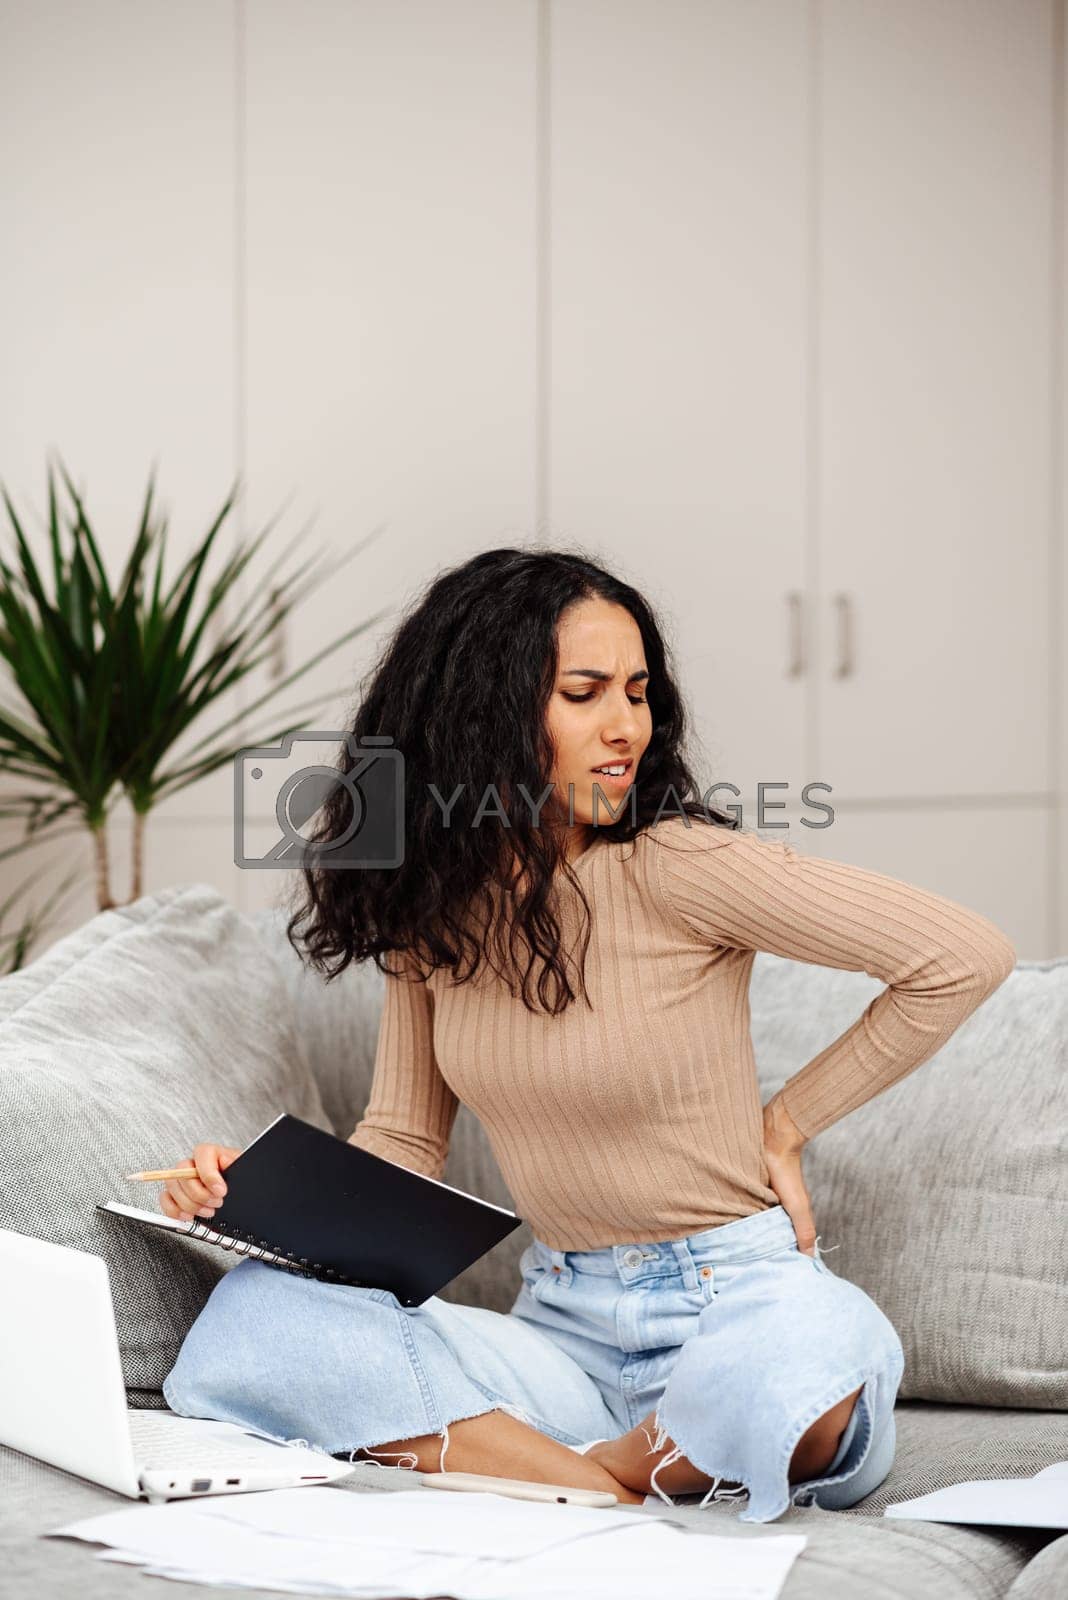 Royalty free image of Healthcare concept. Poor posture and pain at work. by SistersStock